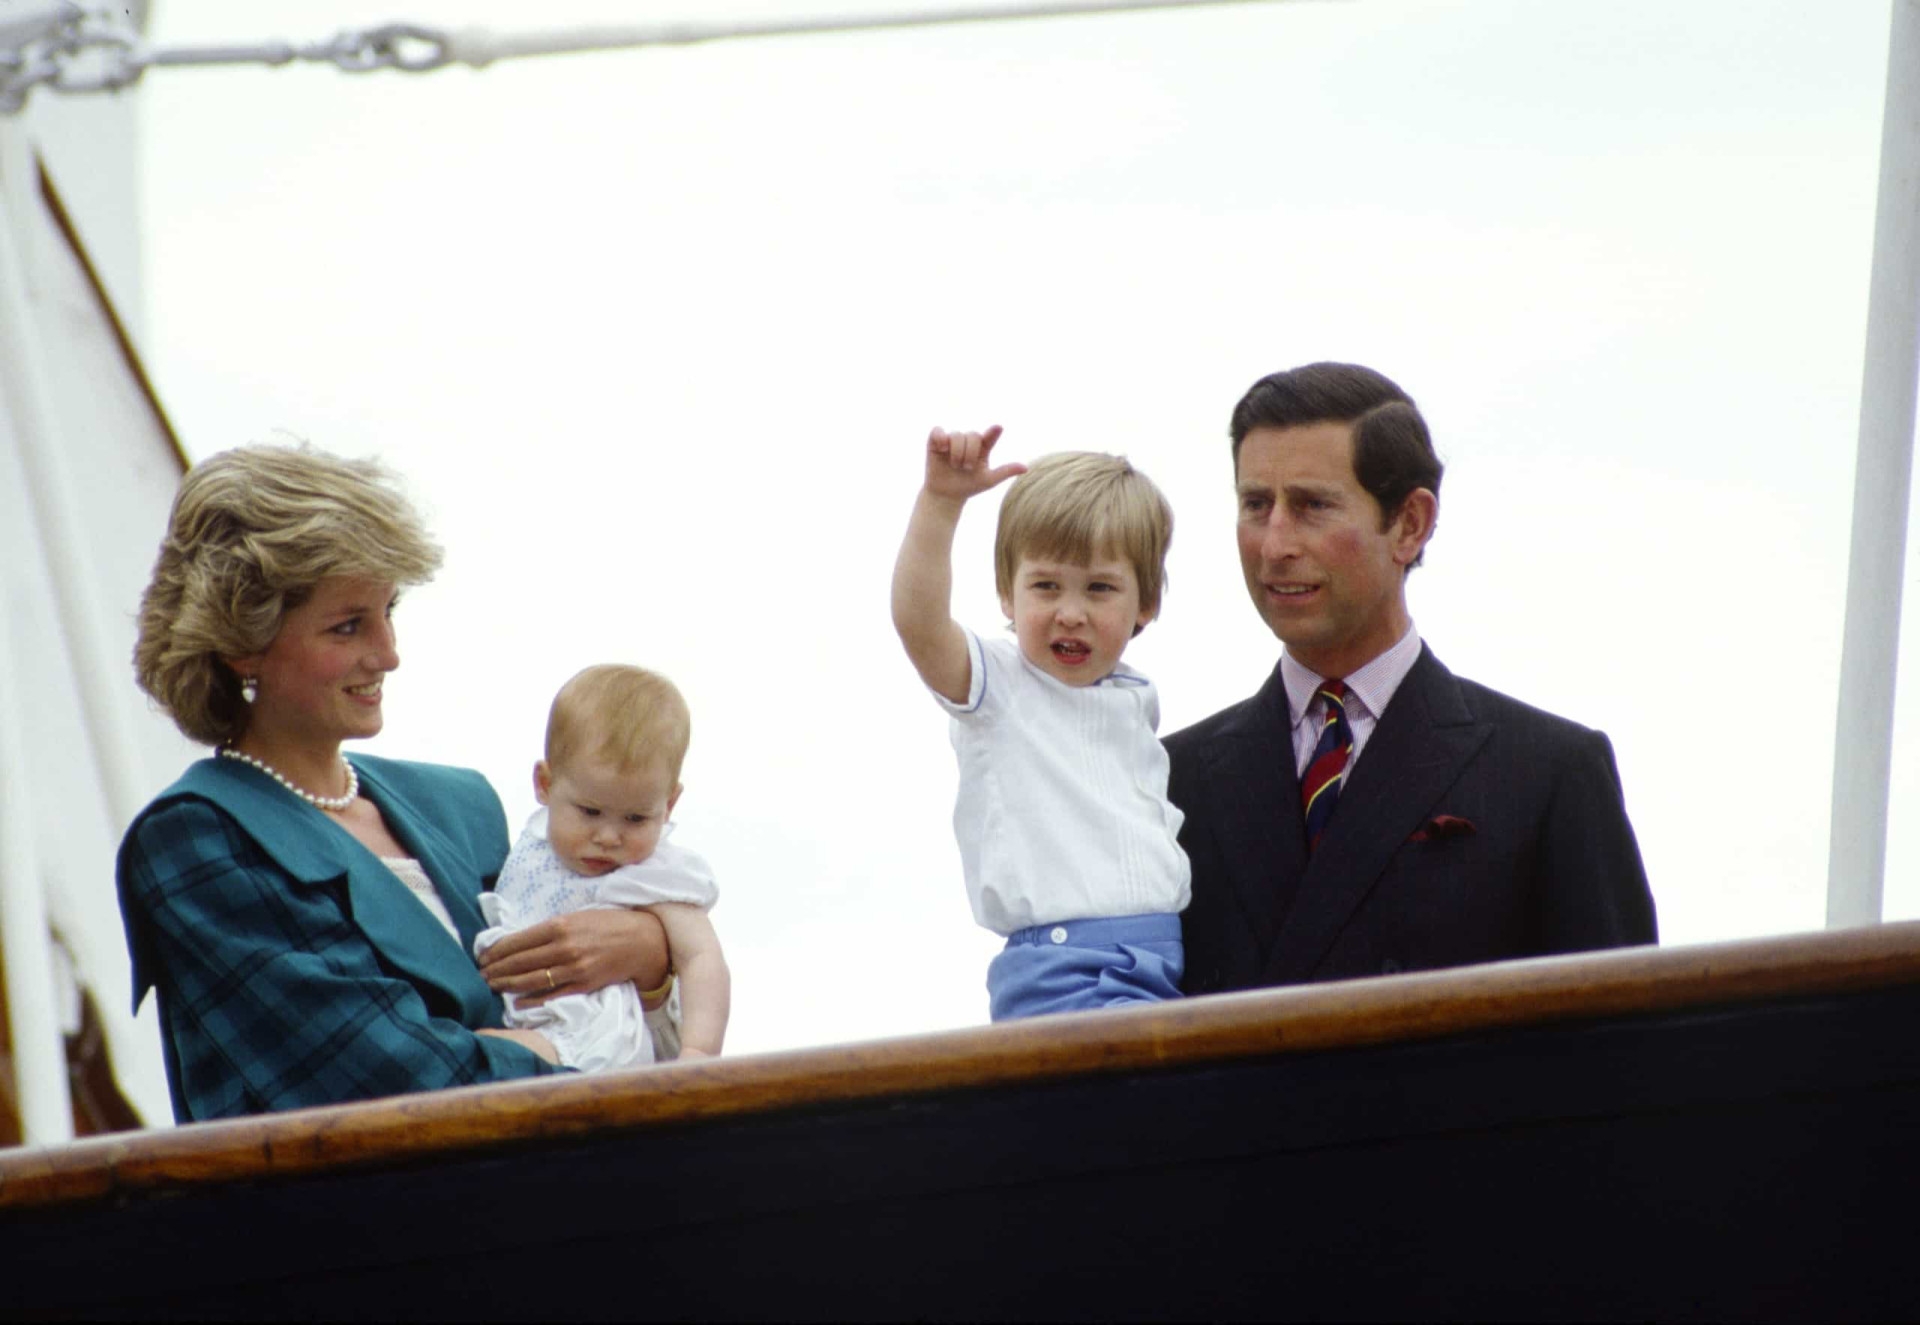 <p>Joining Prince Charles and Princess Diana on their 17-day tour of Italy's sights and cities in April-May 1985 was Prince William and Prince Harry. The family are seen on board <em>Britannia</em> at Venice.</p><p>You may also like:<a href="https://www.starsinsider.com/n/394782?utm_source=msn.com&utm_medium=display&utm_campaign=referral_description&utm_content=474709v3en-sg"> The most unbelievably expensive weddings in history </a></p>